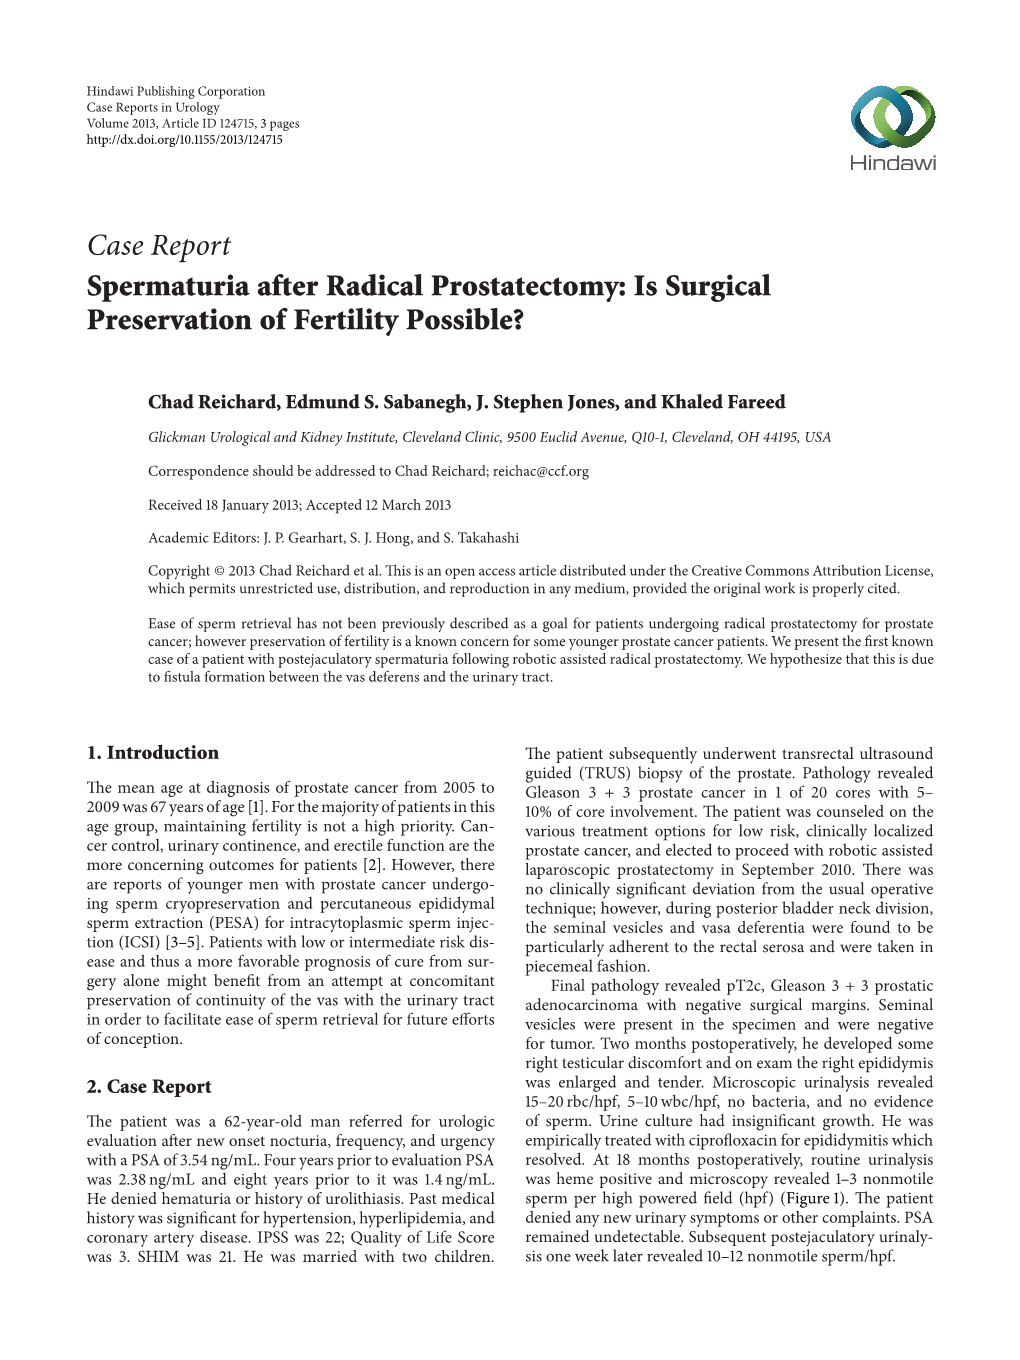 Spermaturia After Radical Prostatectomy: Is Surgical Preservation of Fertility Possible?